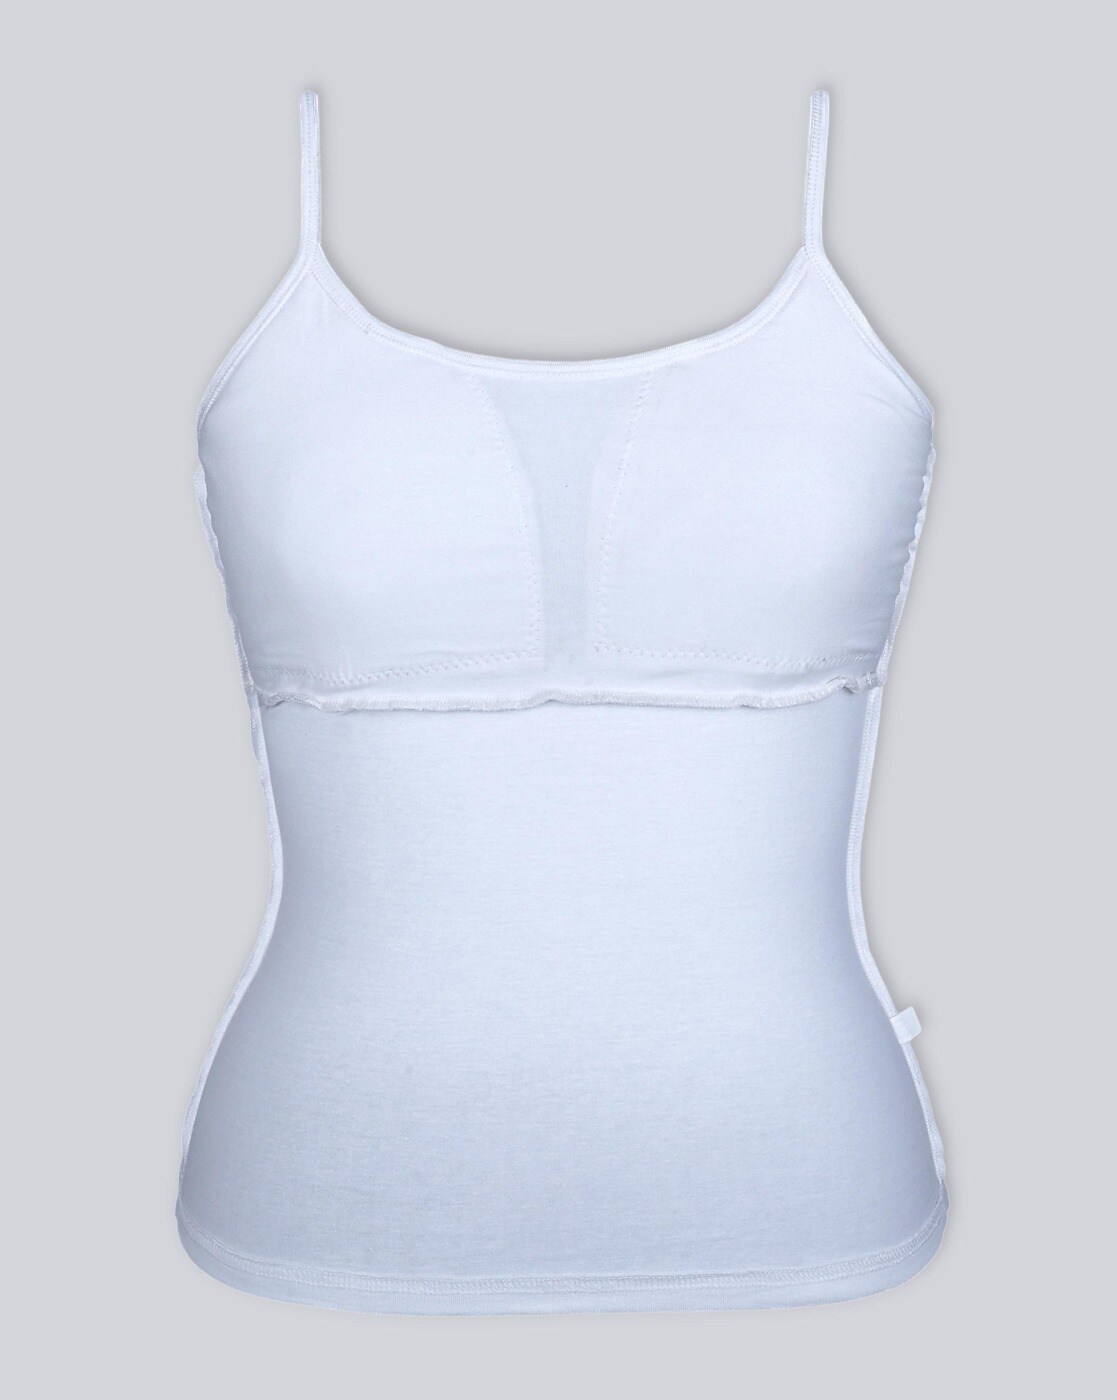 Buy White Camisoles & Slips for Girls by Dchica Online